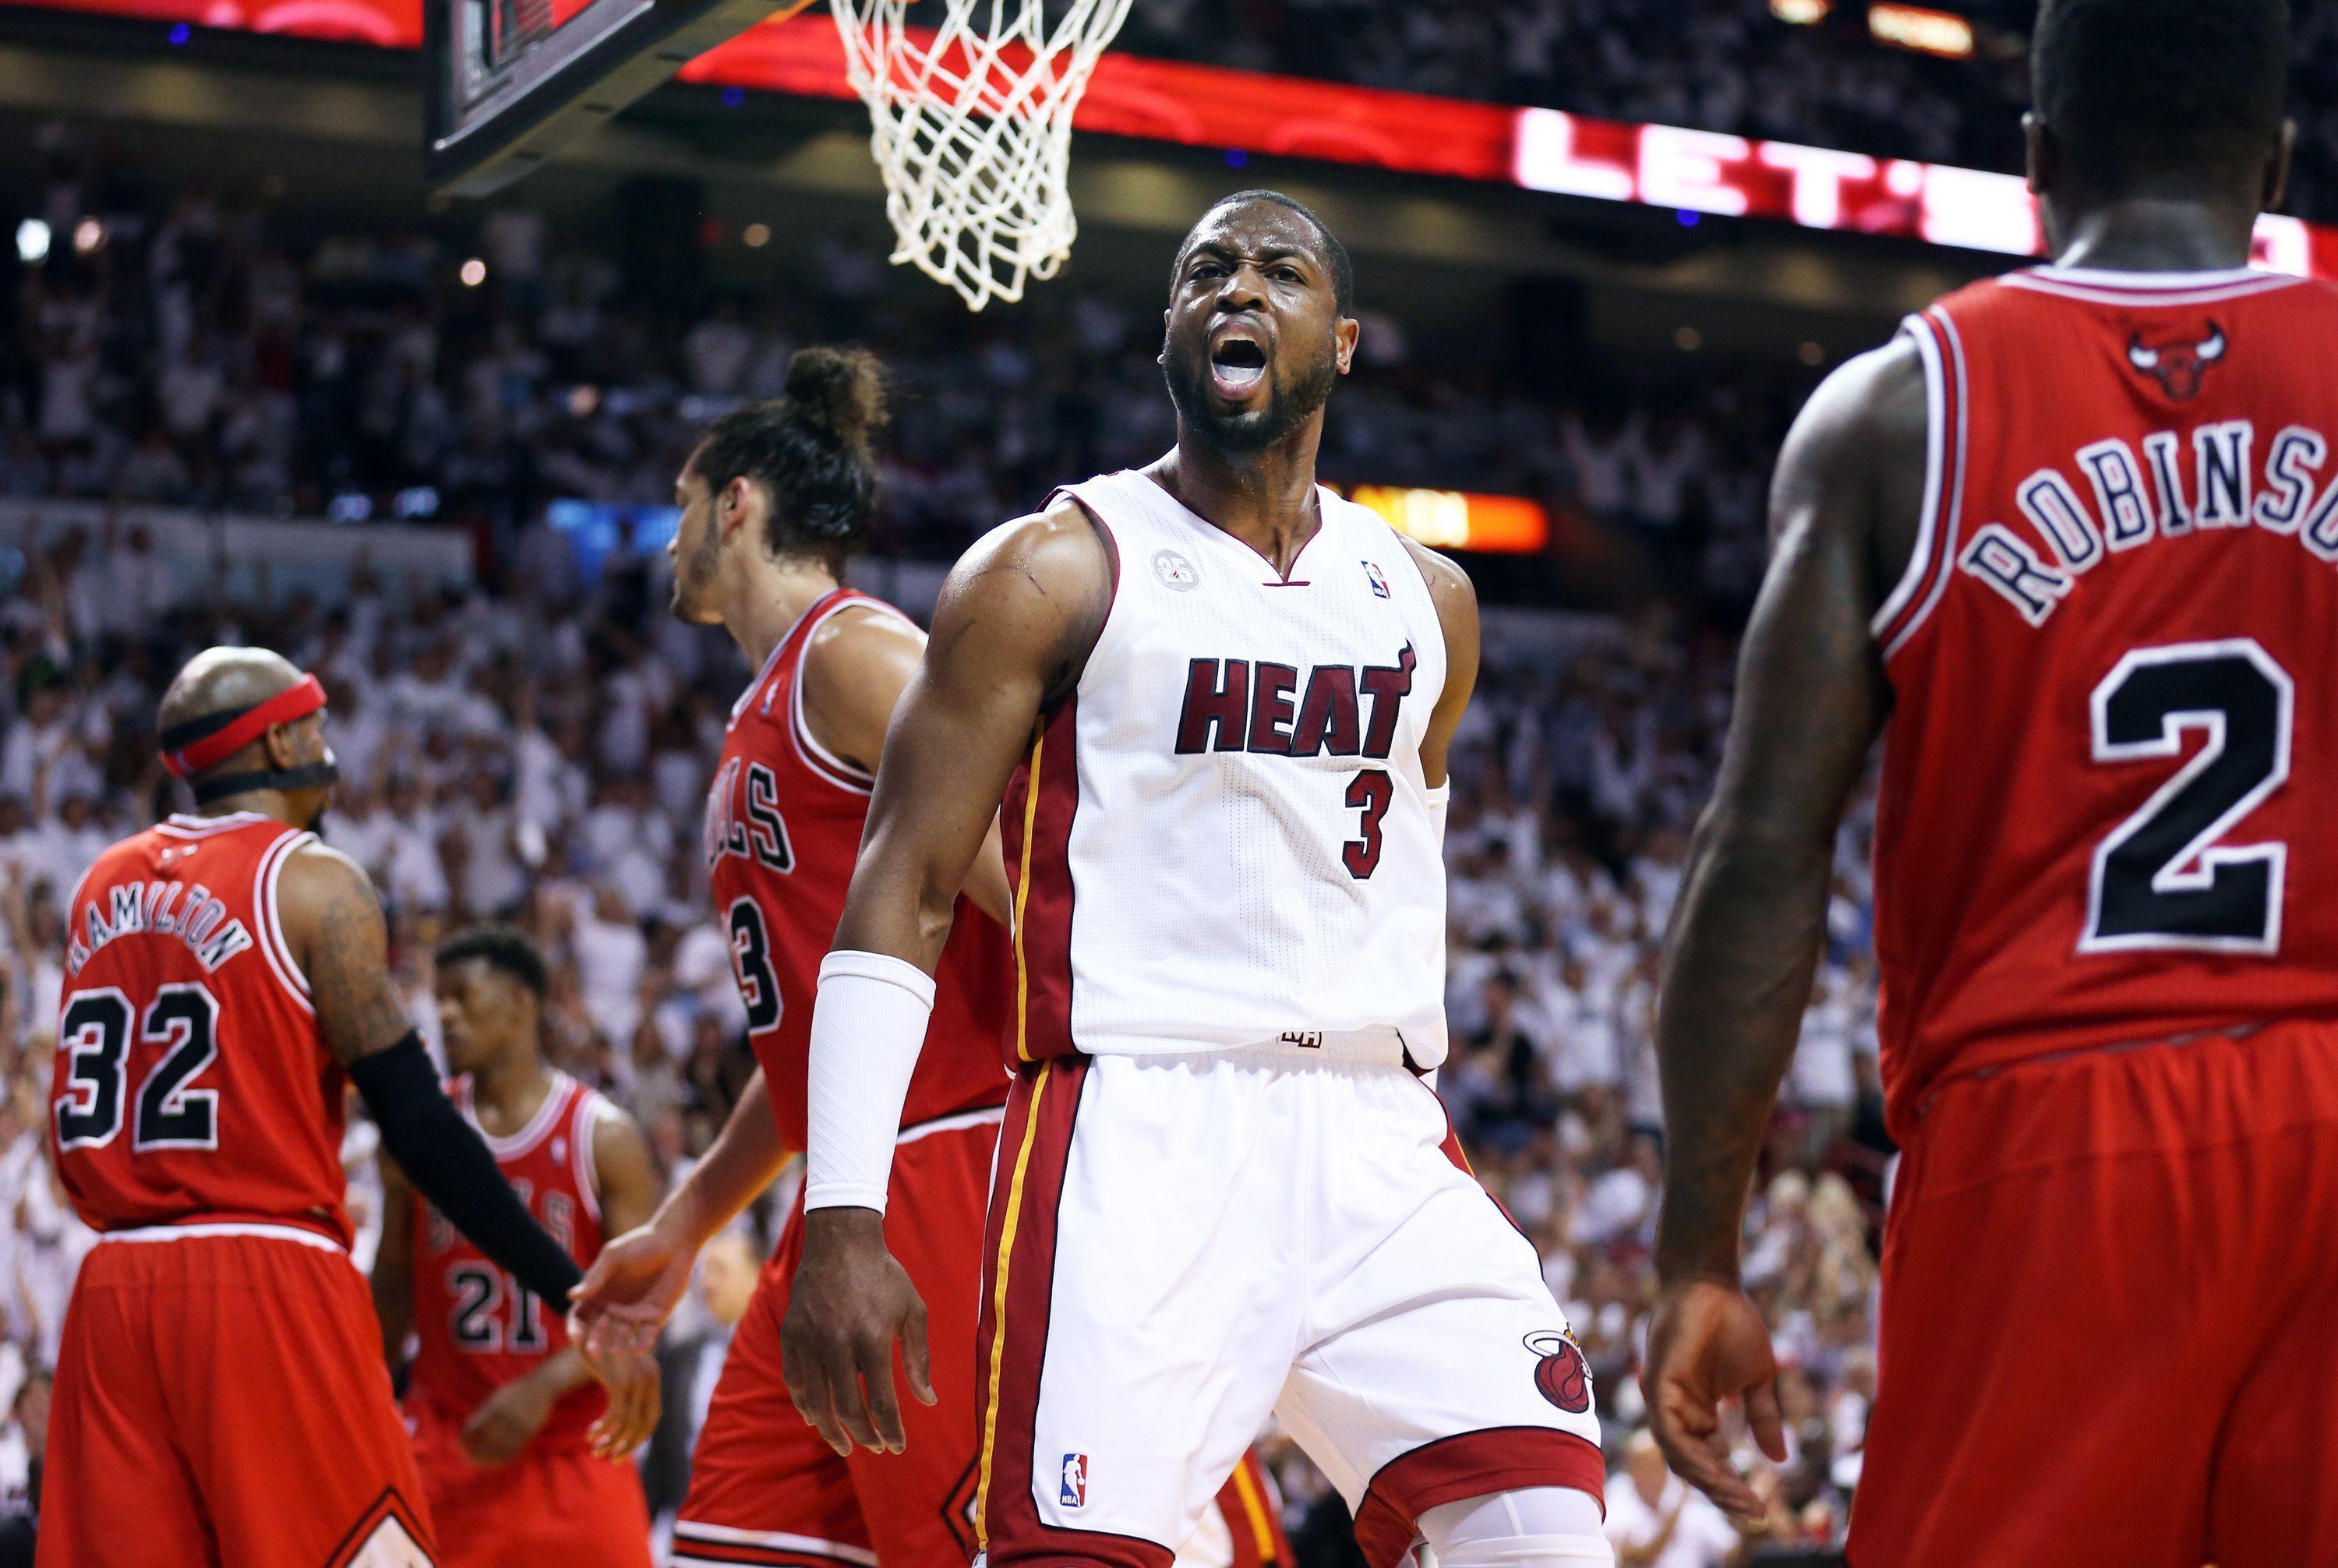 REPORT: Bulls Willing To Outbid Heat, Have Meeting With Wade